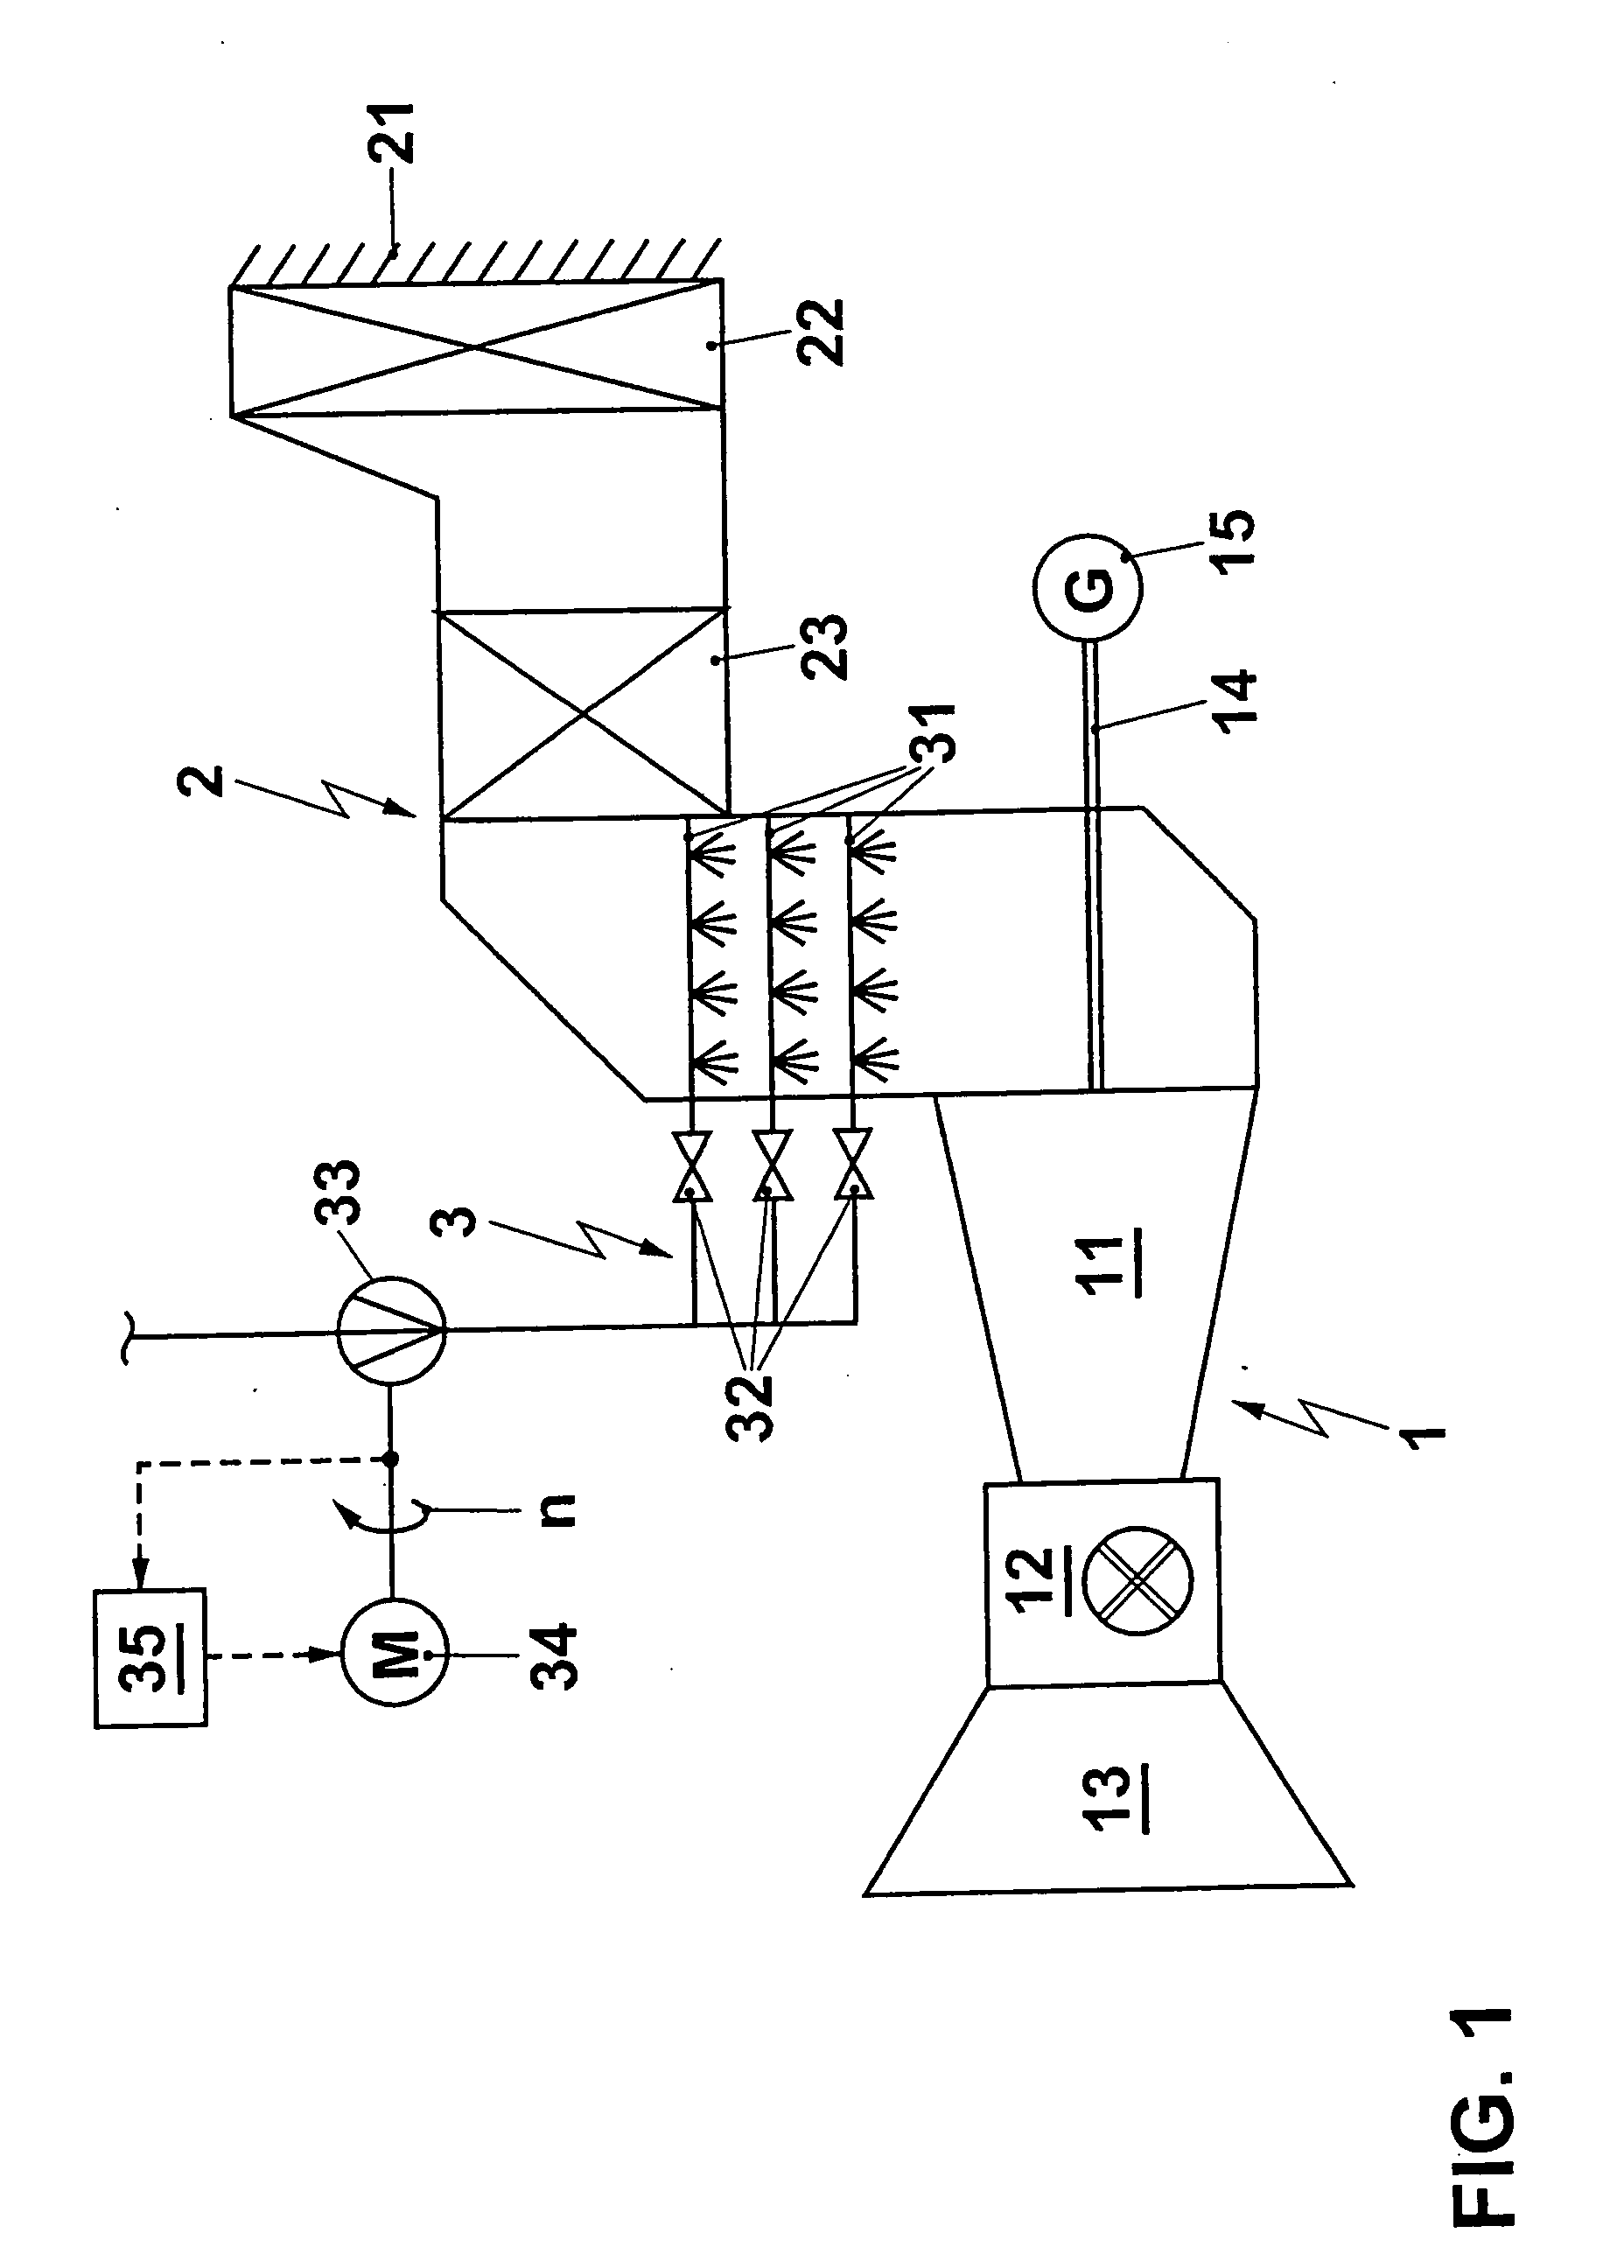 Method for injecting a liquid mist into an intake duct